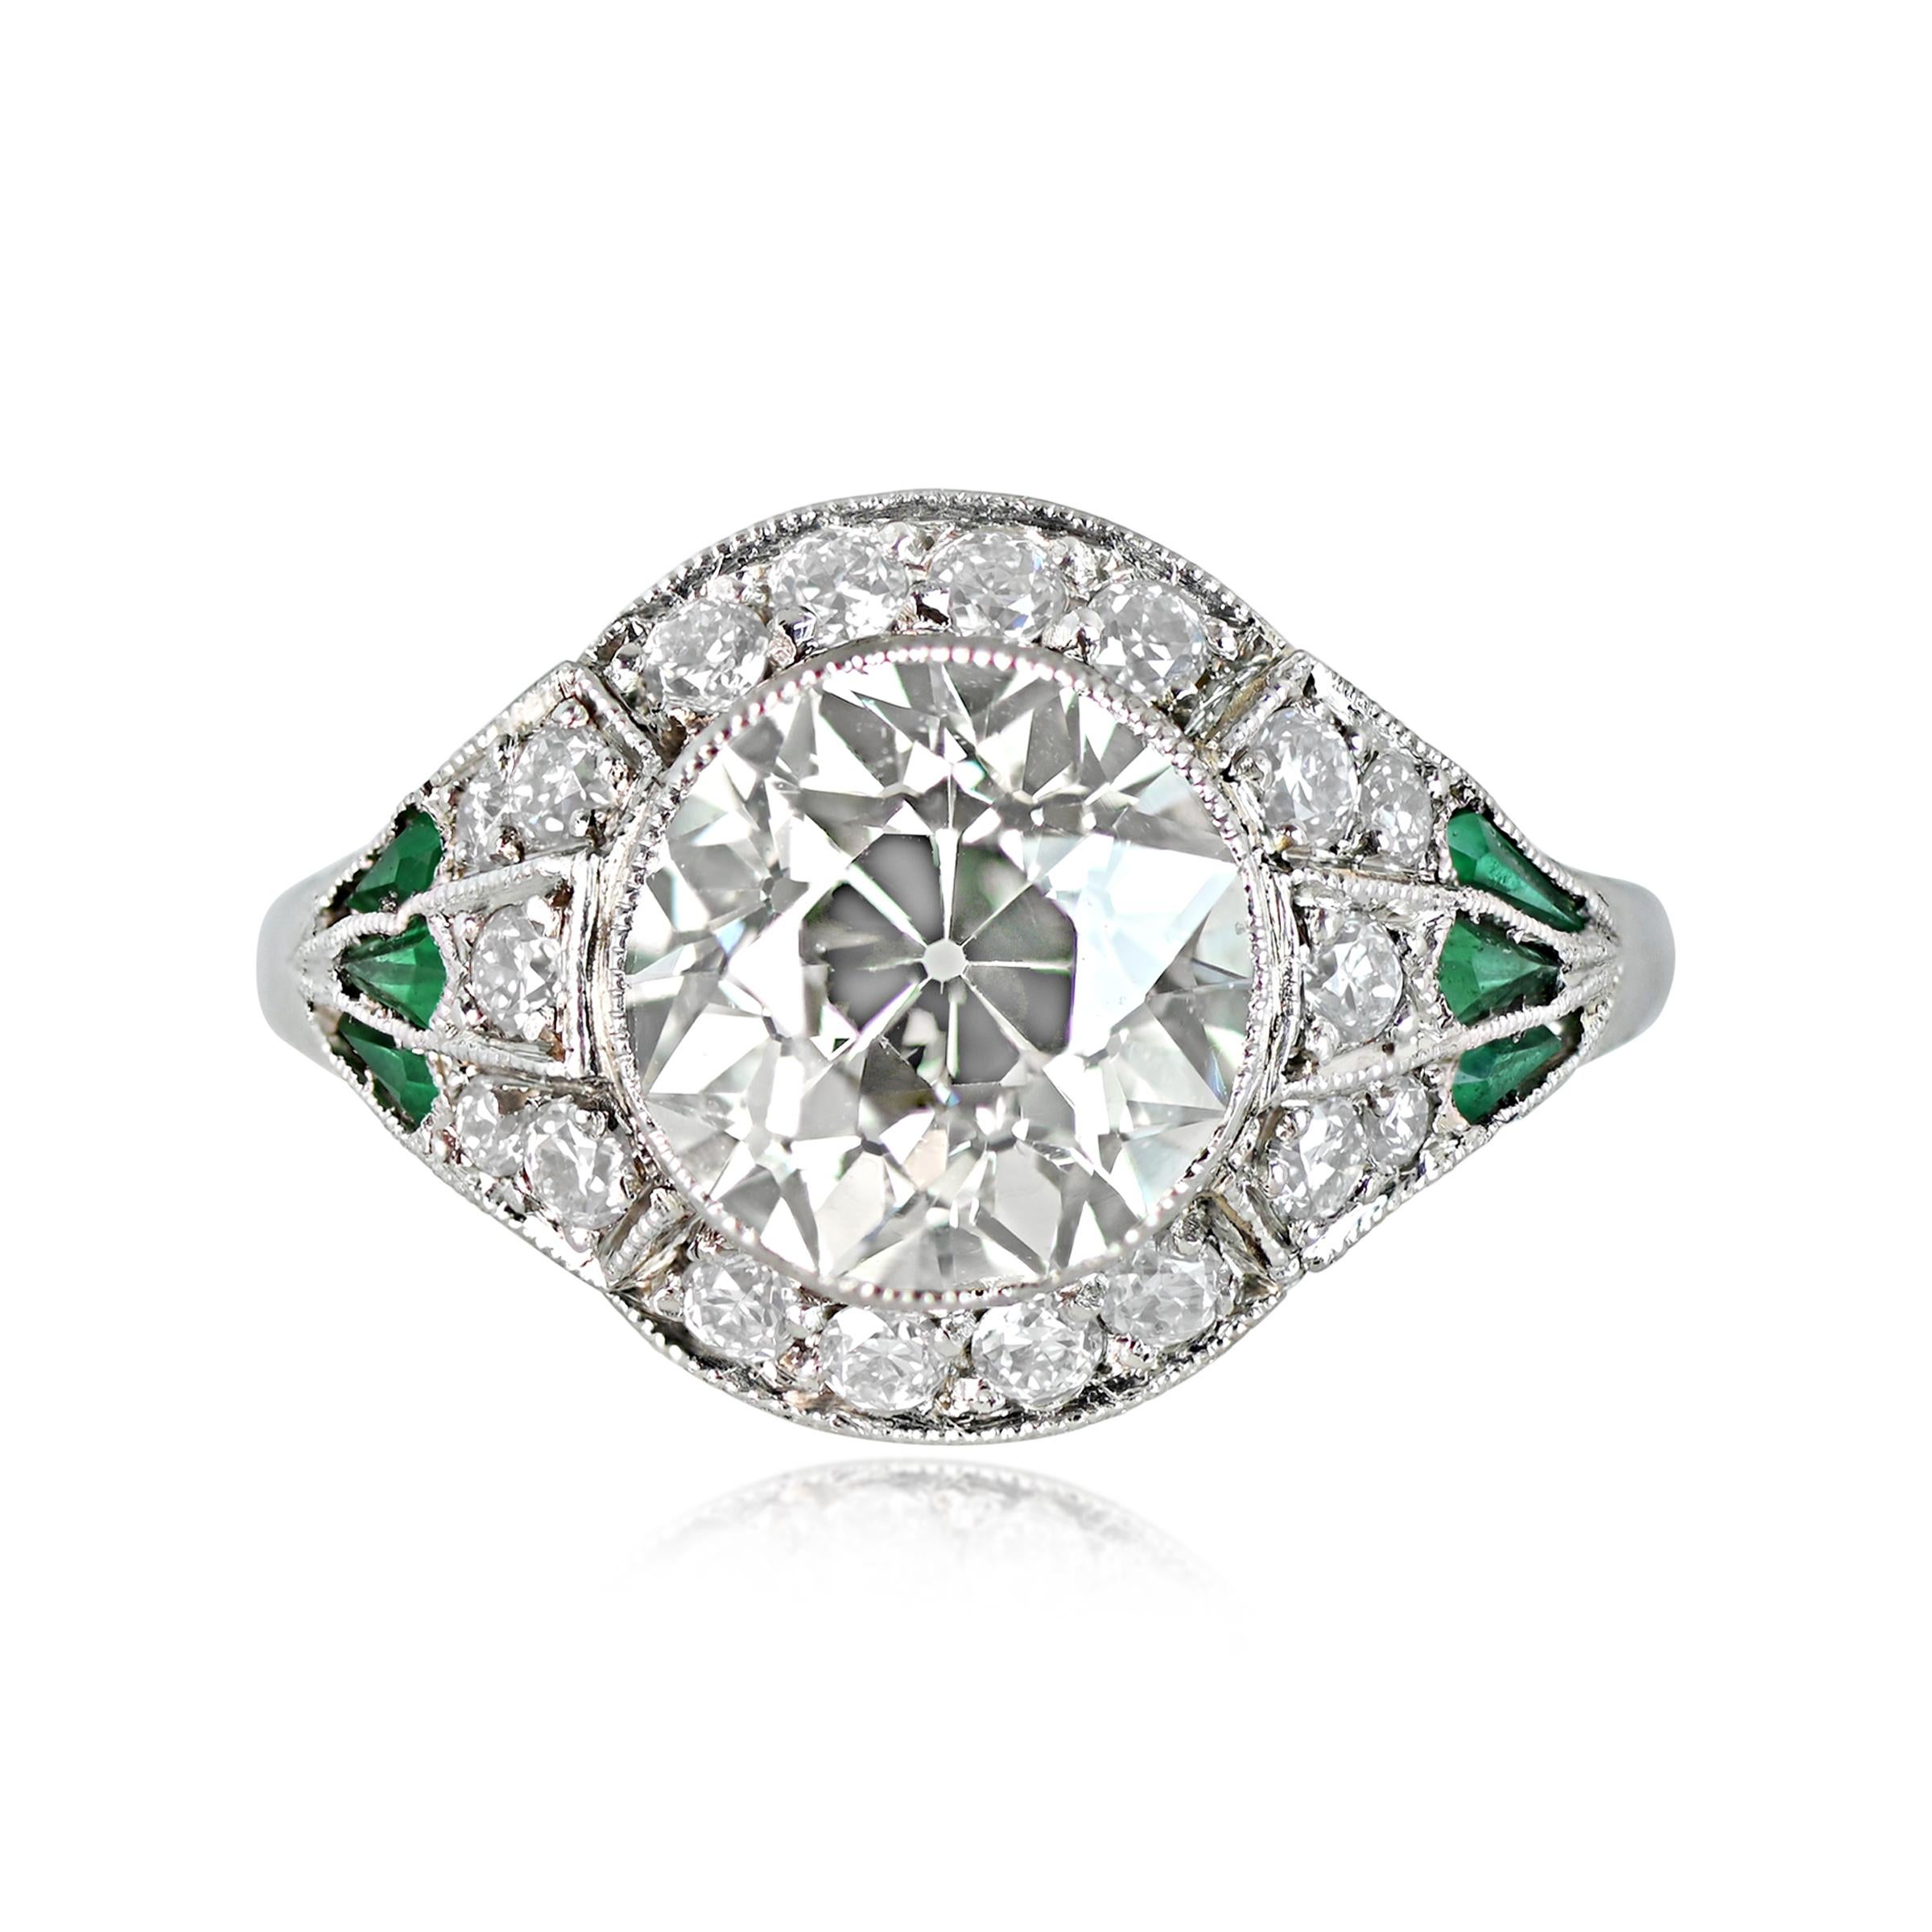 This Art Deco-style engagement ring is decorated and showcases a 2.42-carat old European cut diamond with M color and VS2 clarity. The center diamond is surrounded by an old-cut diamond halo, and the shoulders feature kite-shaped natural emeralds.